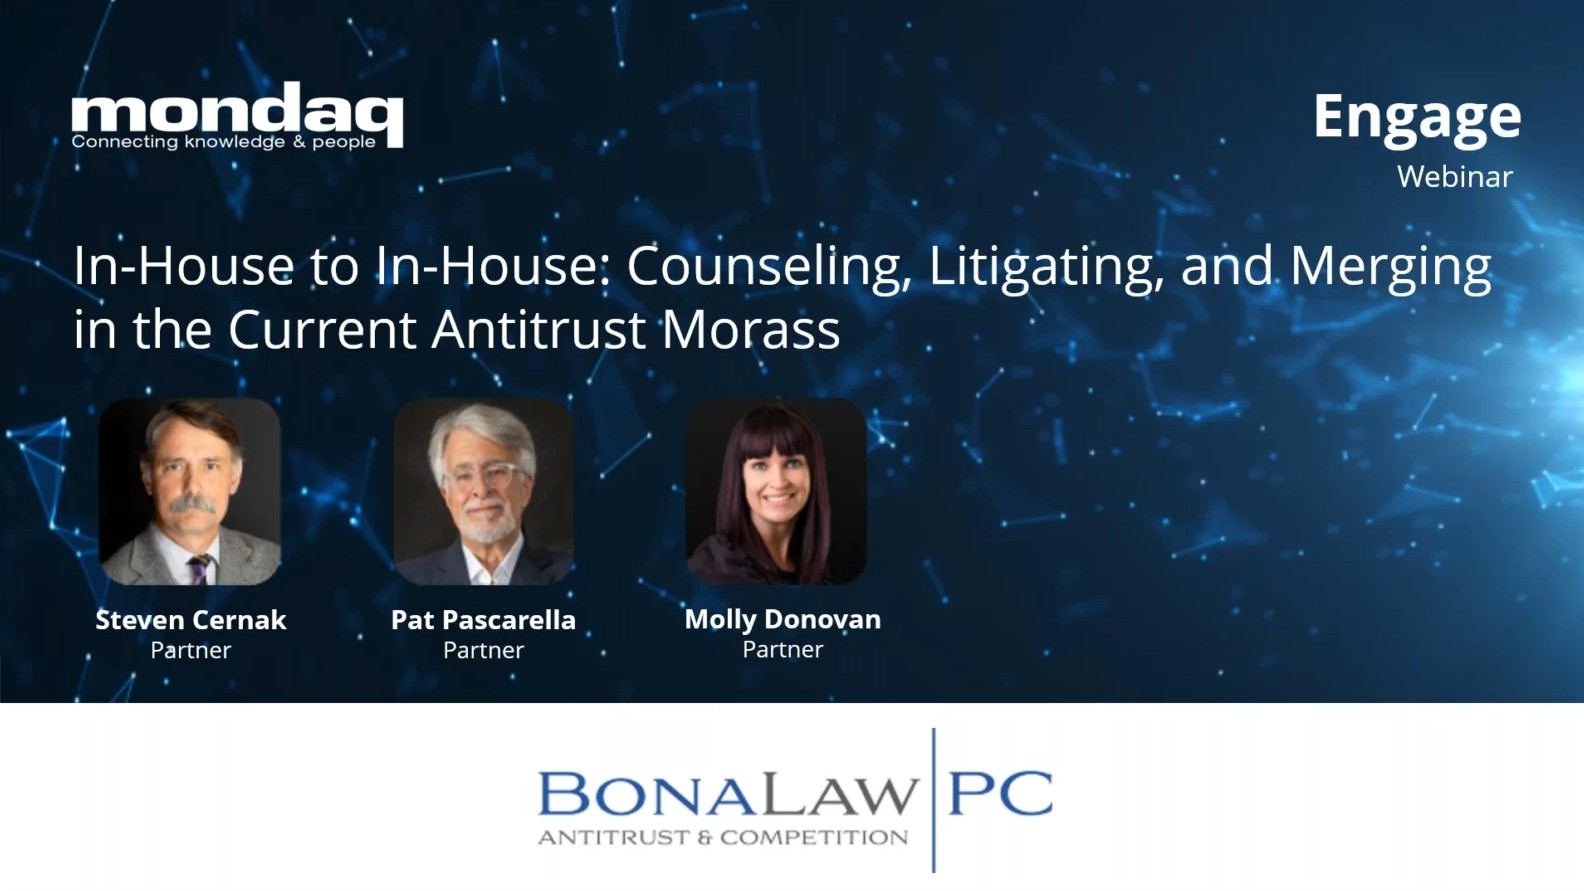 In-House to In-House:  Counseling, Litigating, and Merging in the Current Antitrust Morass